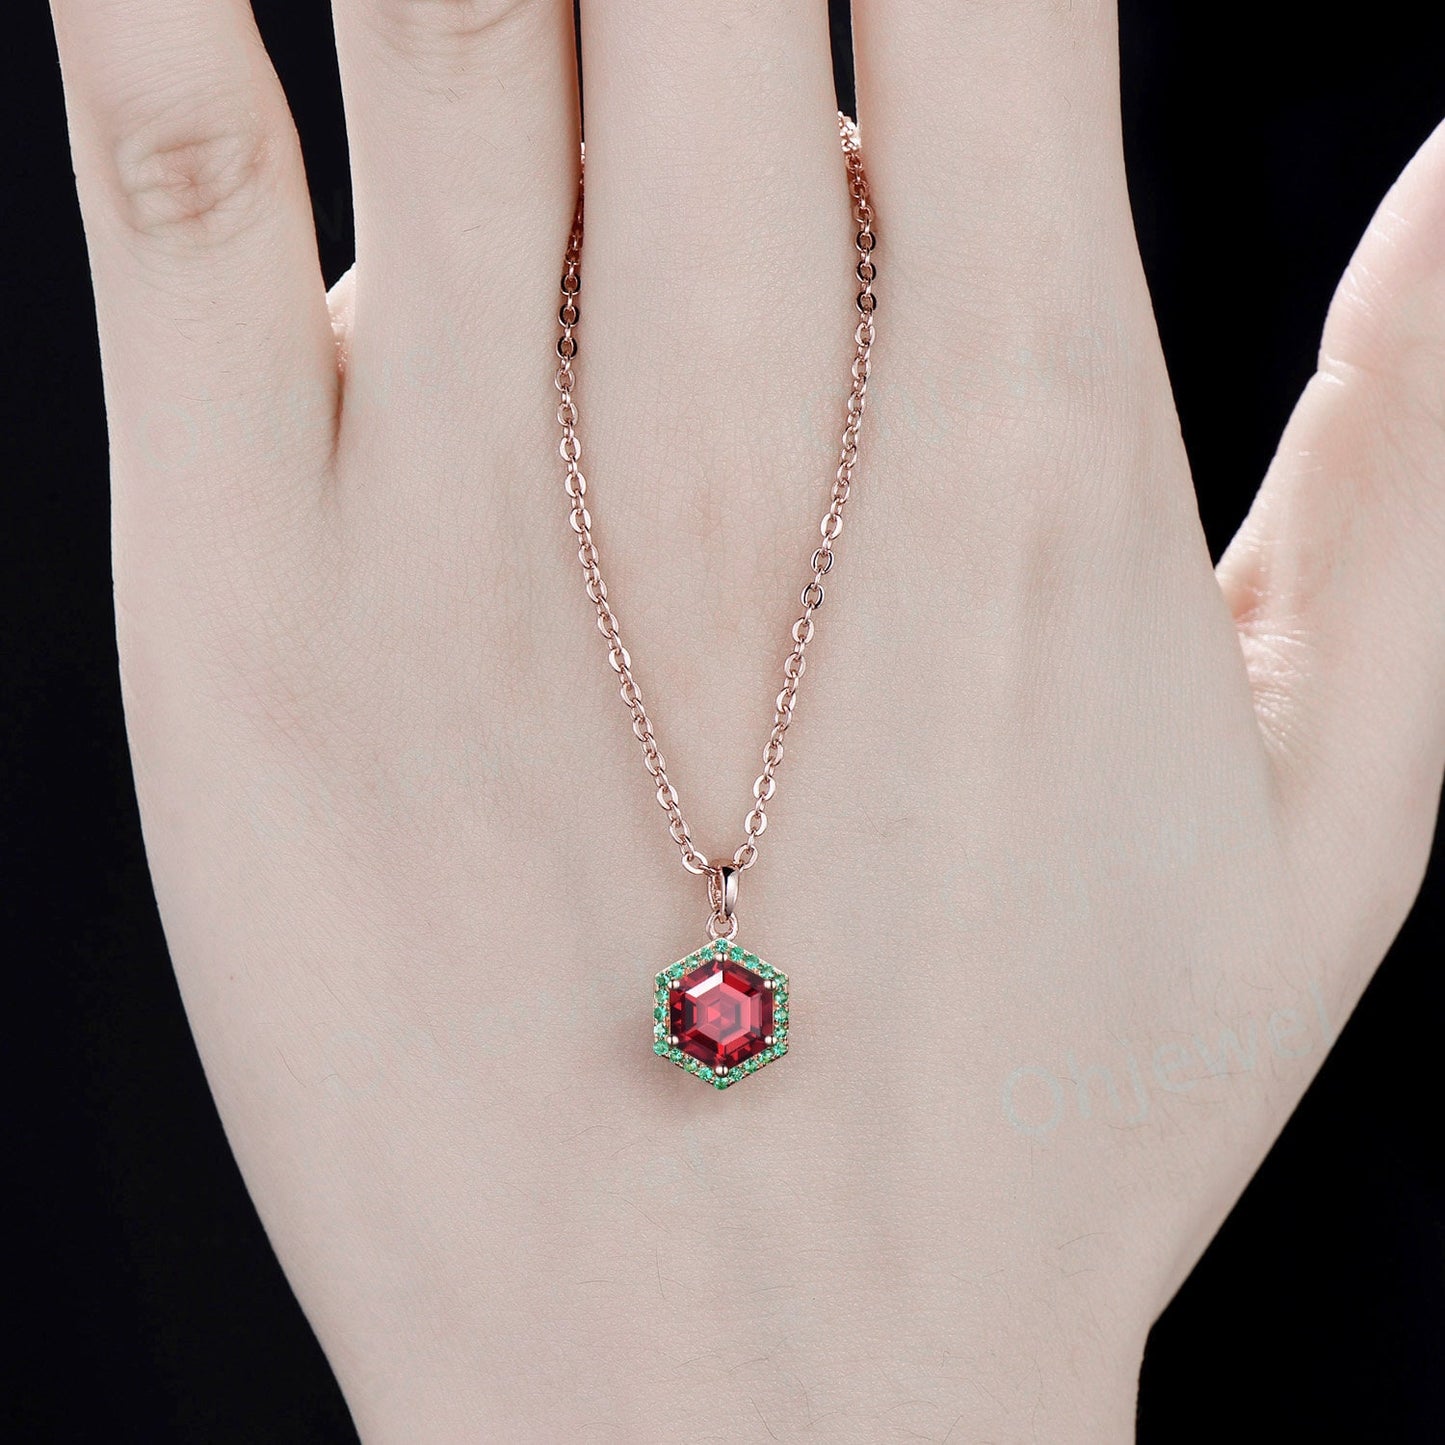 Vintage hexagon cut red ruby necklace rose gold unique 6 prong halo emerald necklace Pendant women dainty wedding anniversary gift her